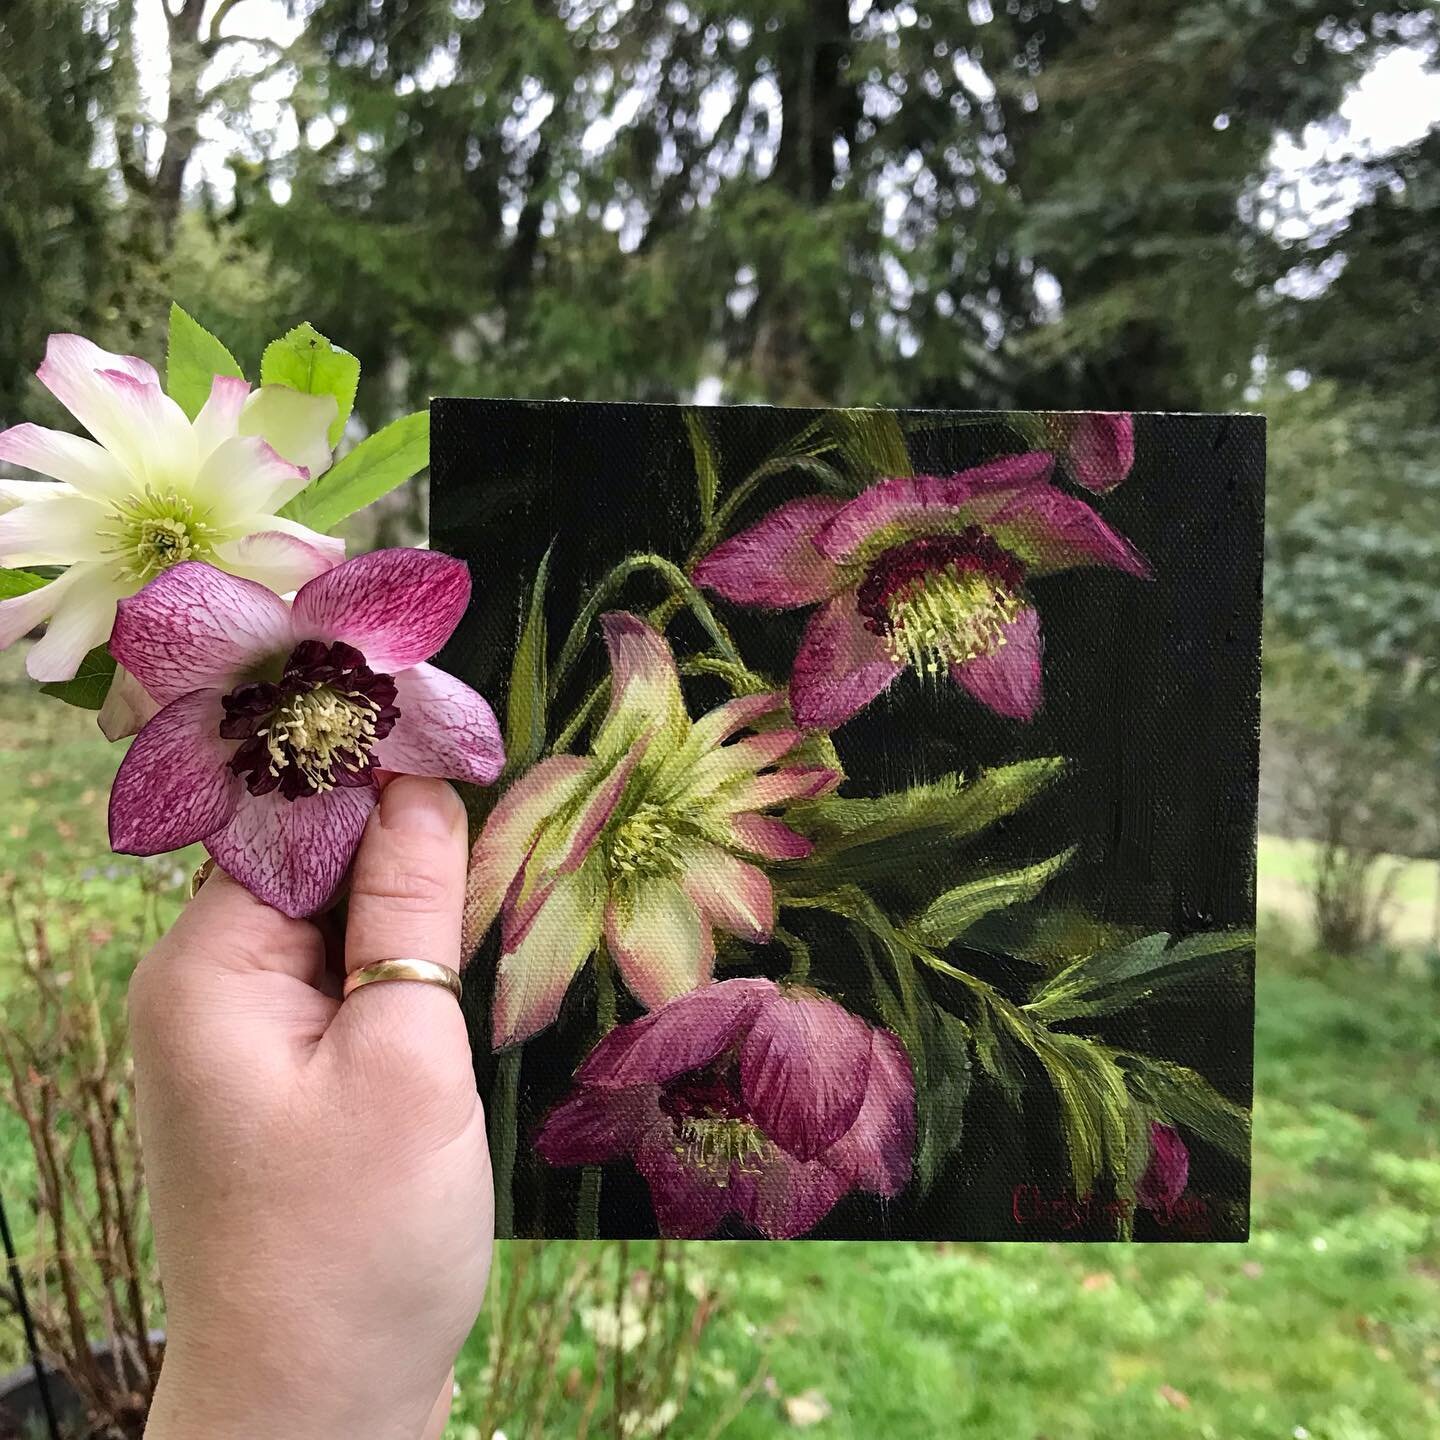 There are so many different kinds of hellebores! I was amazed that these little flowers from my garden bounced back after the snow and ice storm last week. Resilient little flowers they are!
Here is a painting study of two varieties in my garden 💕